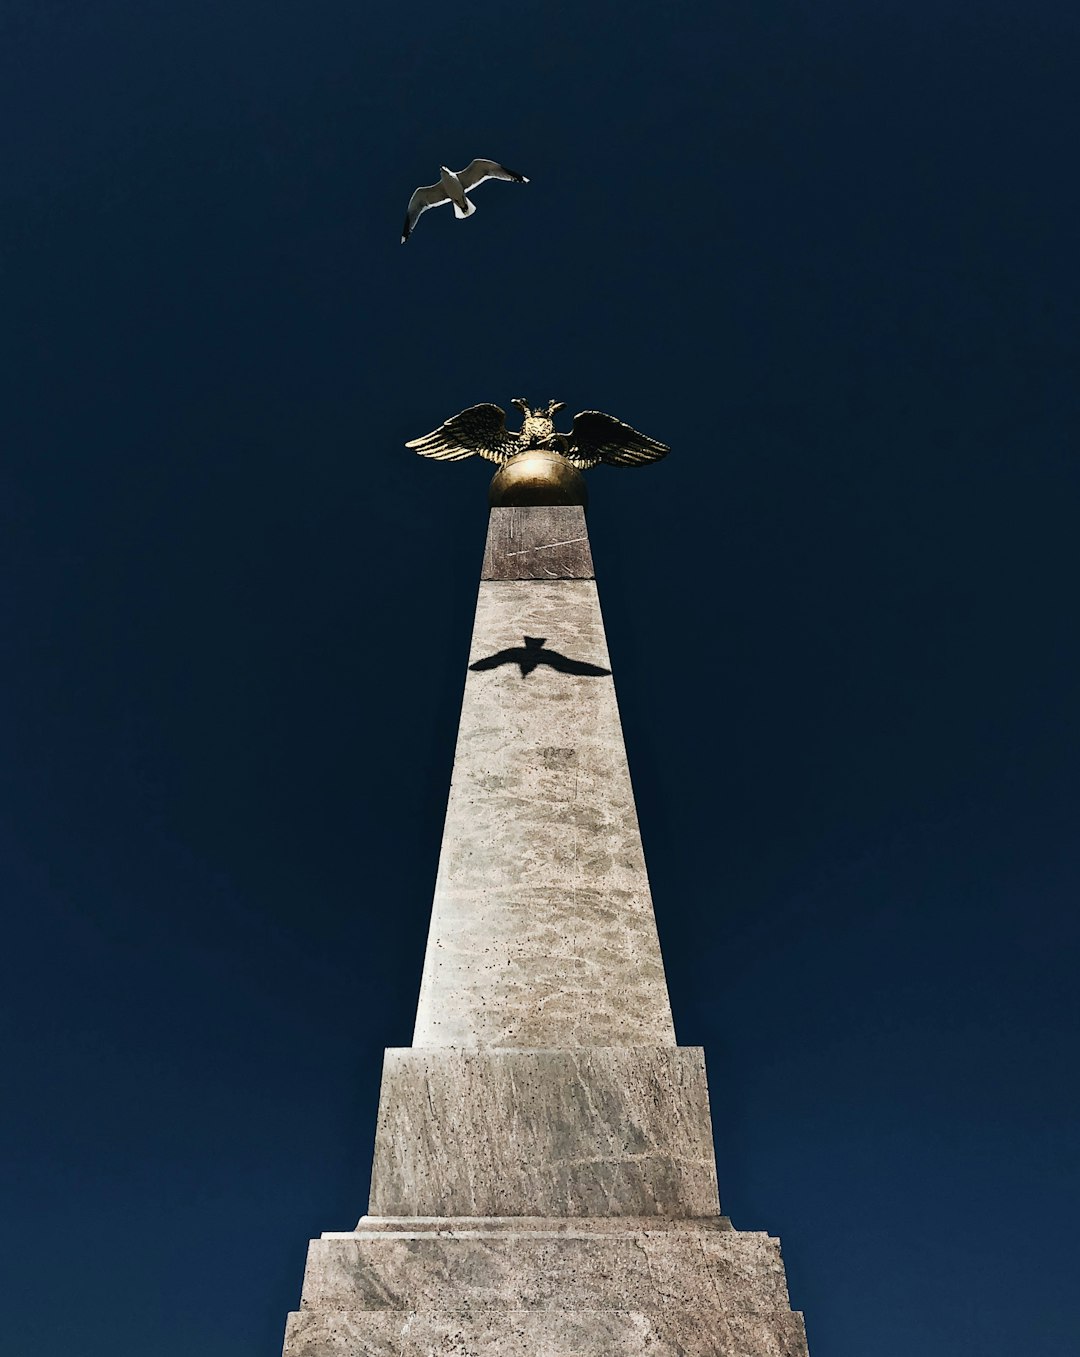 low-angle photography of concrete tower and flying bird